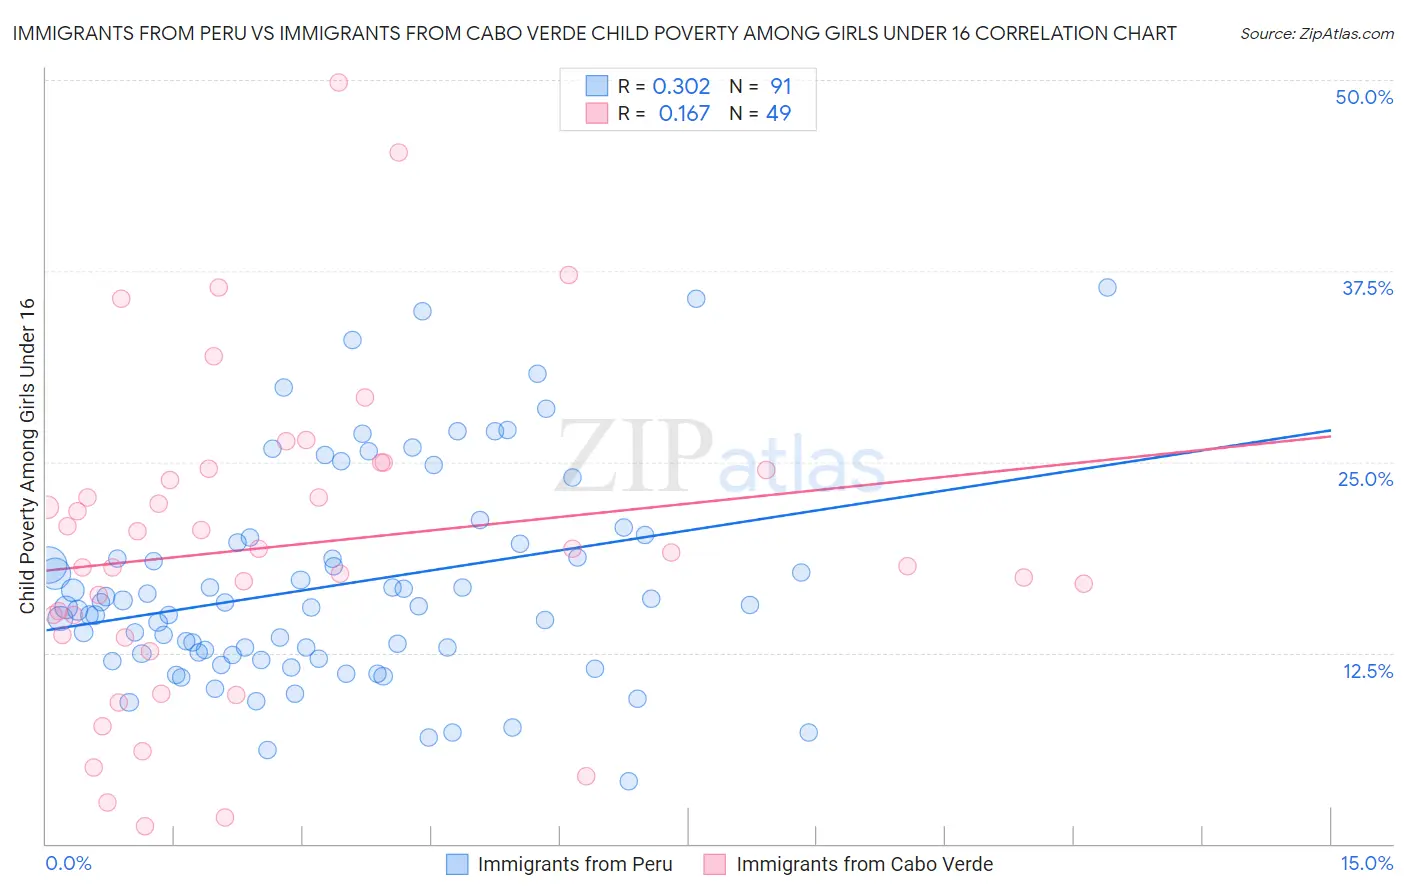 Immigrants from Peru vs Immigrants from Cabo Verde Child Poverty Among Girls Under 16